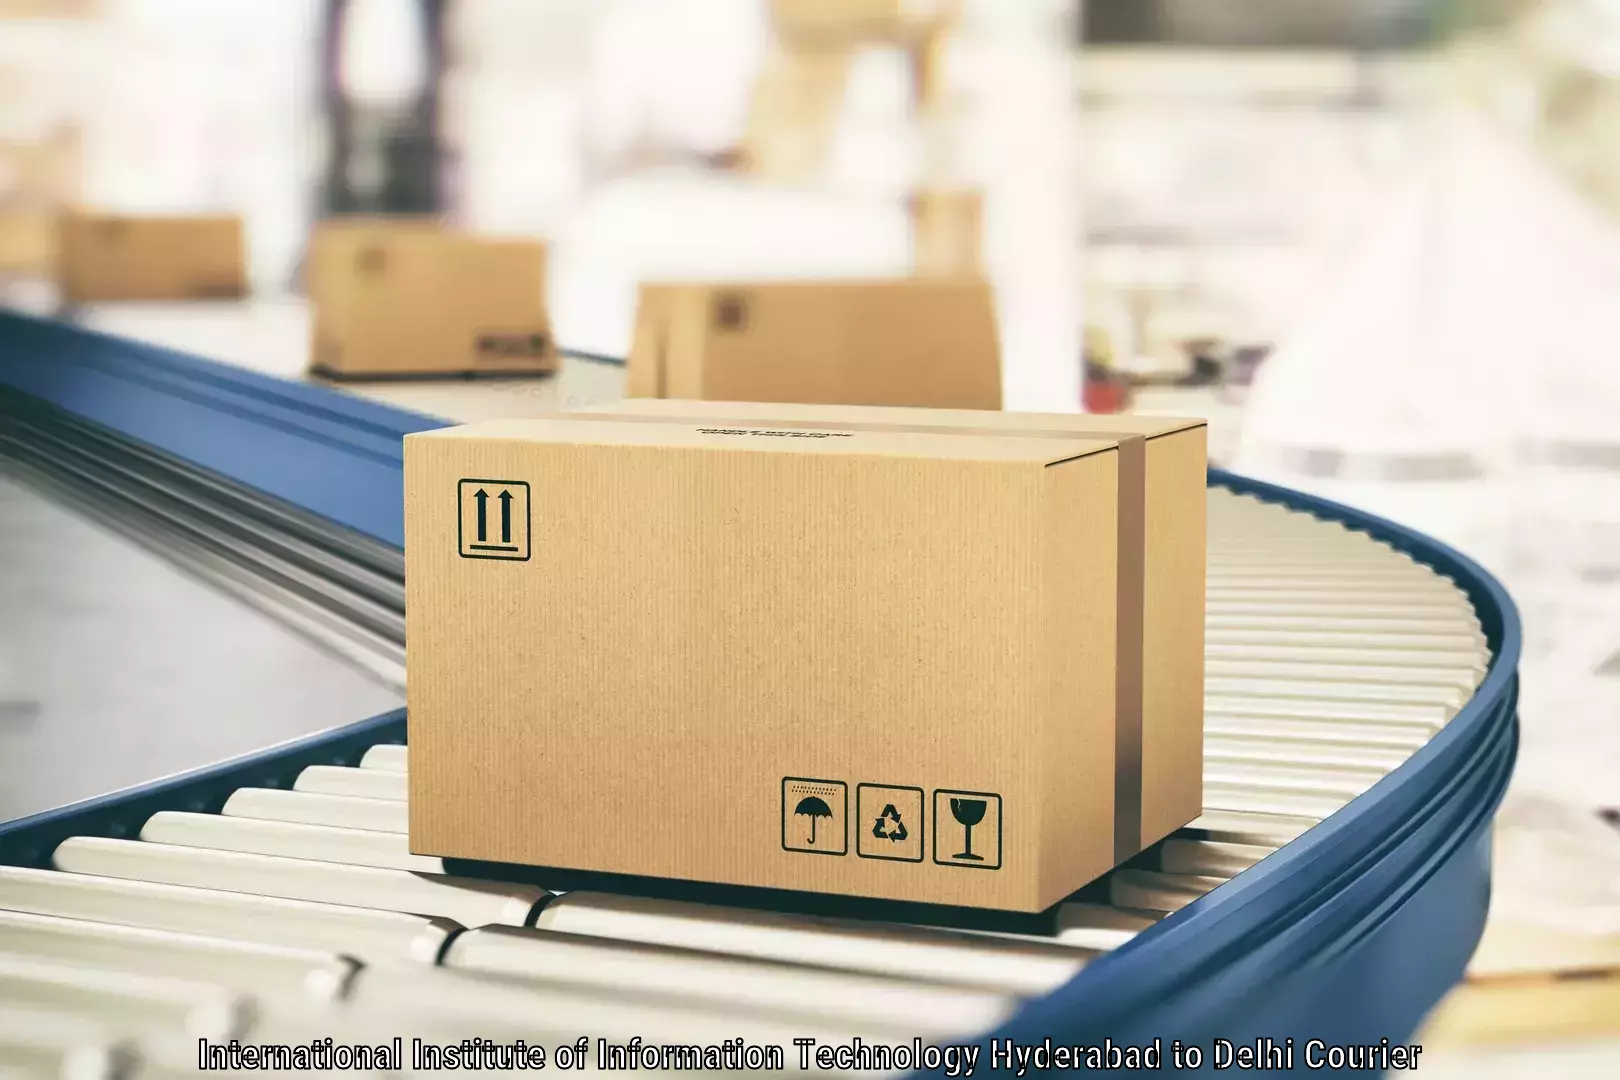 Affordable parcel service International Institute of Information Technology Hyderabad to Lodhi Road